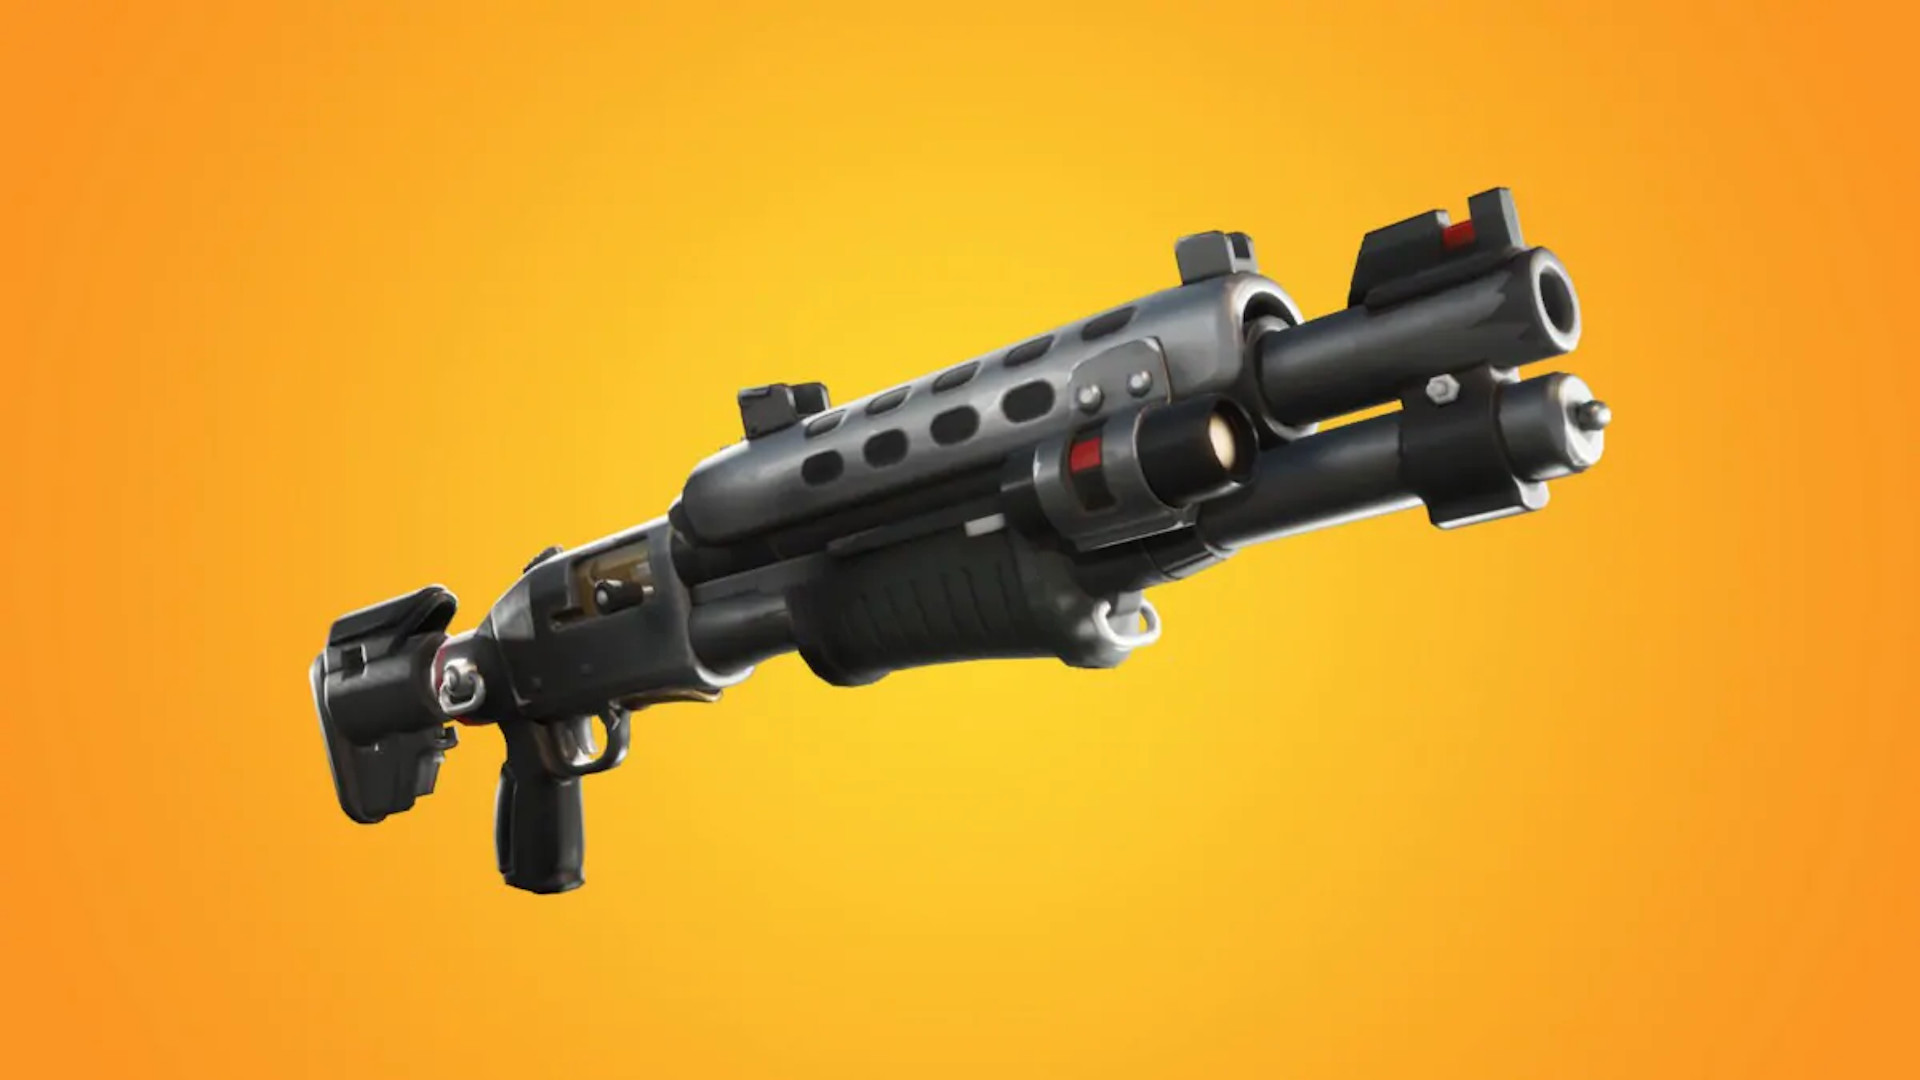 Effective Fortnite Weapon Metas Fortnite Chapter 2 Season 7 Tier List The Best Weapons And How To Craft Them The Loadout